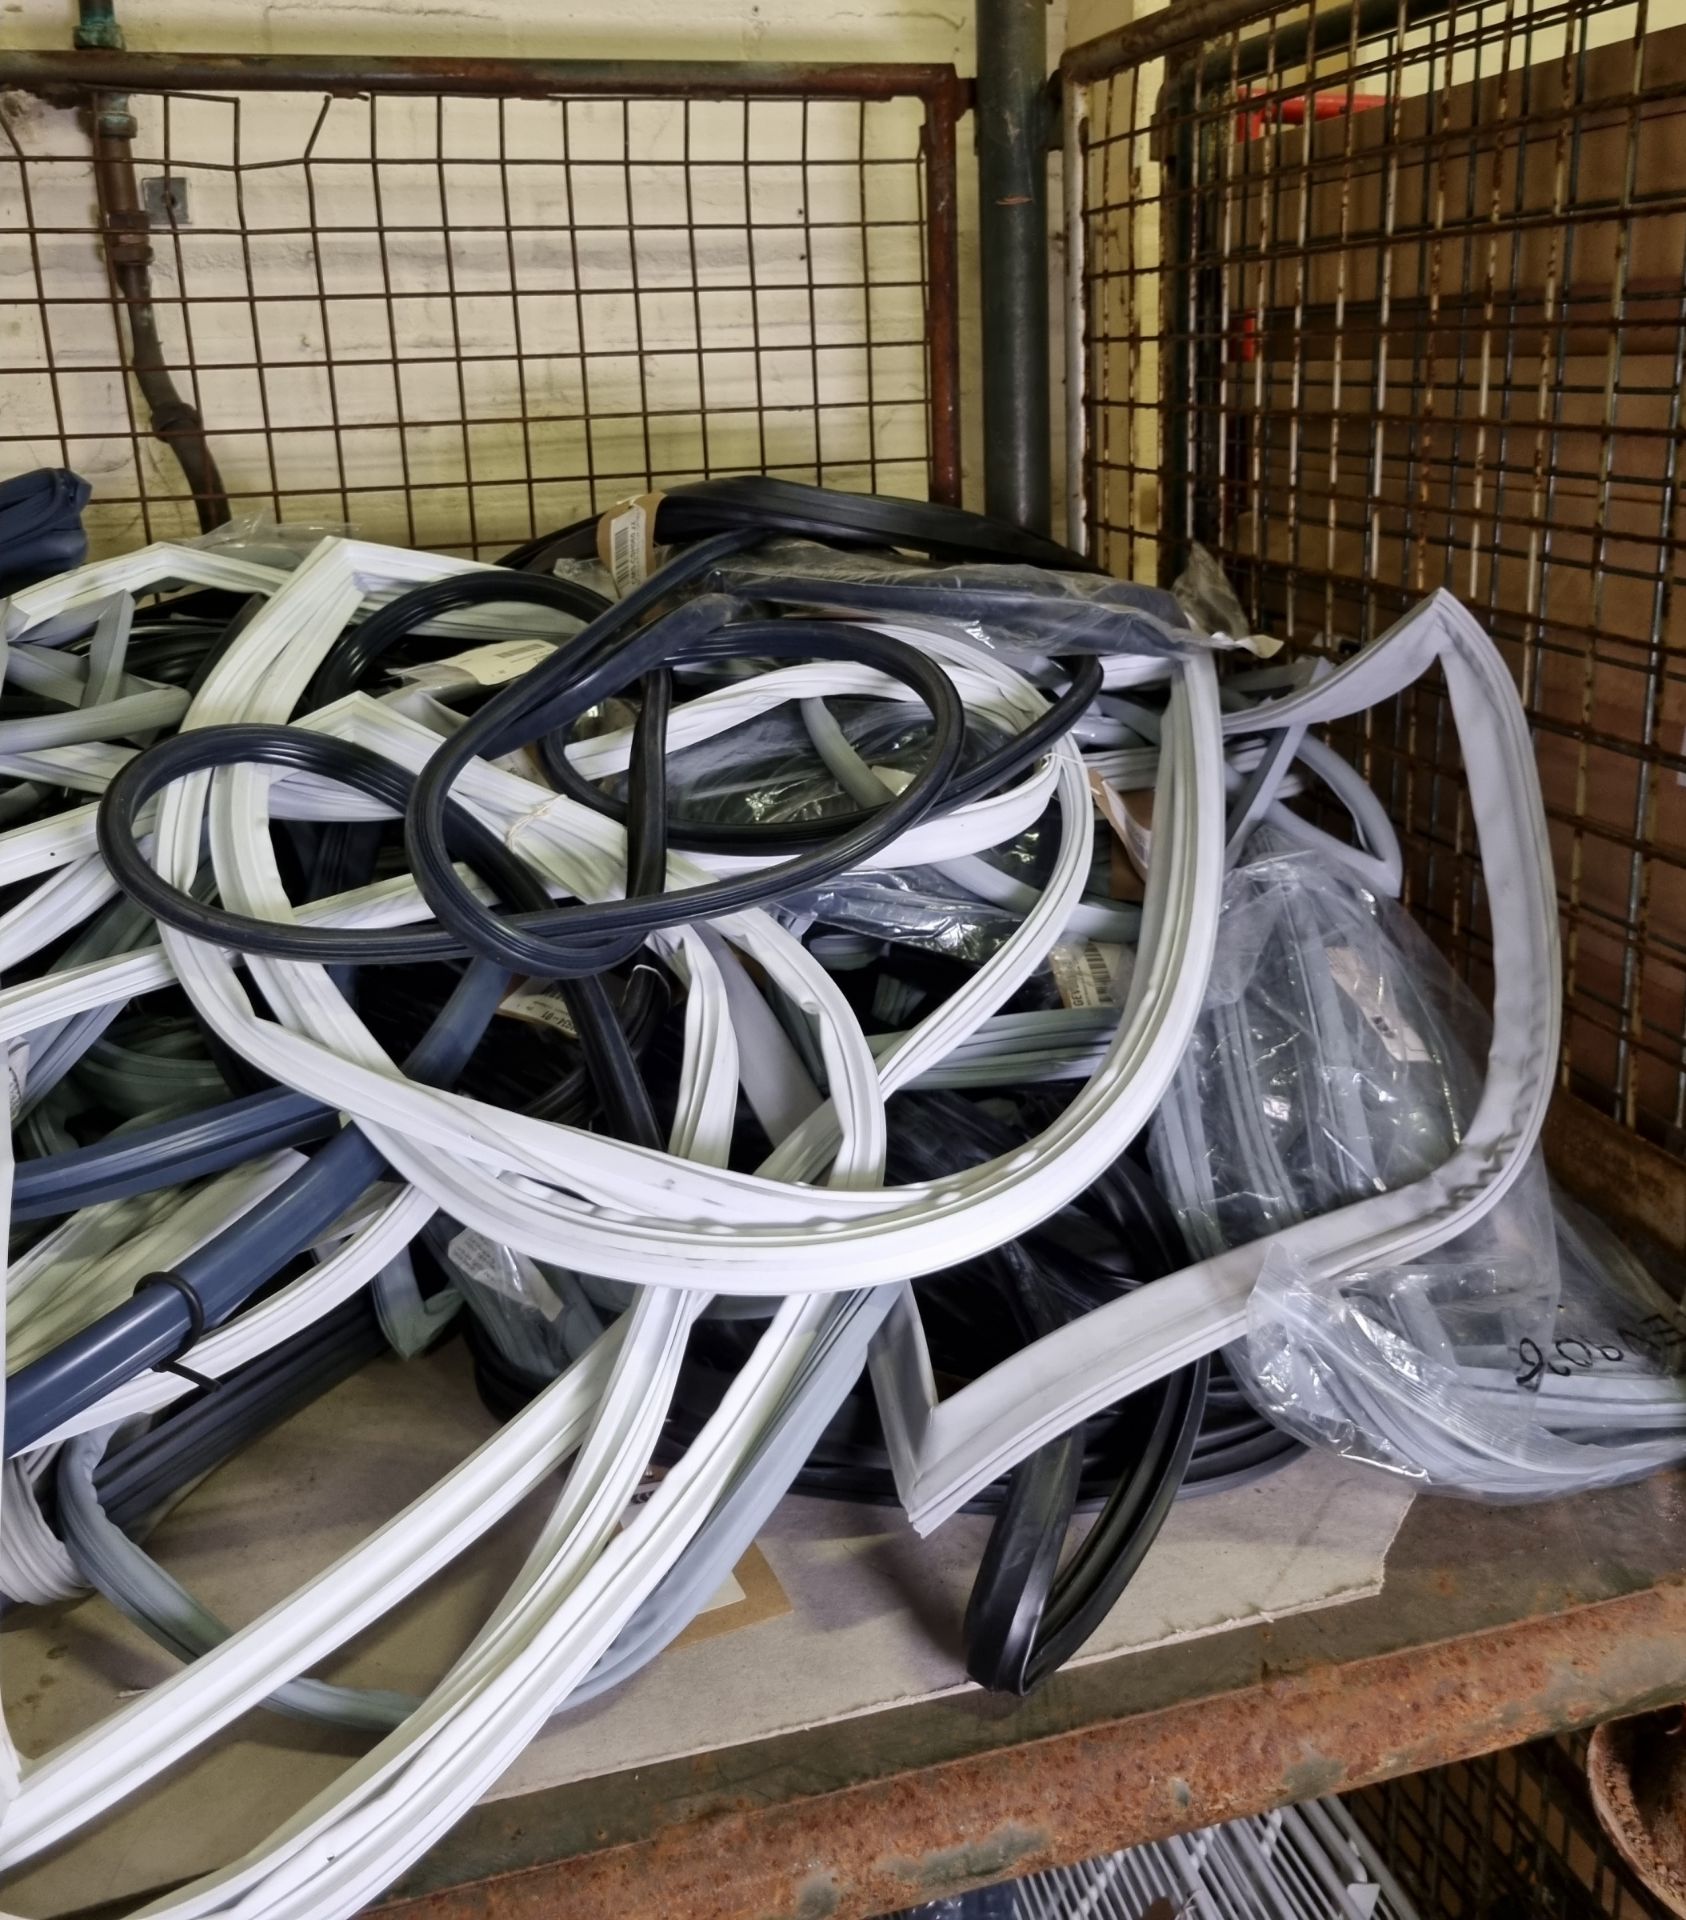 Rubber door seal gaskets - mixed sizes - approximately 90 pieces - Image 2 of 3